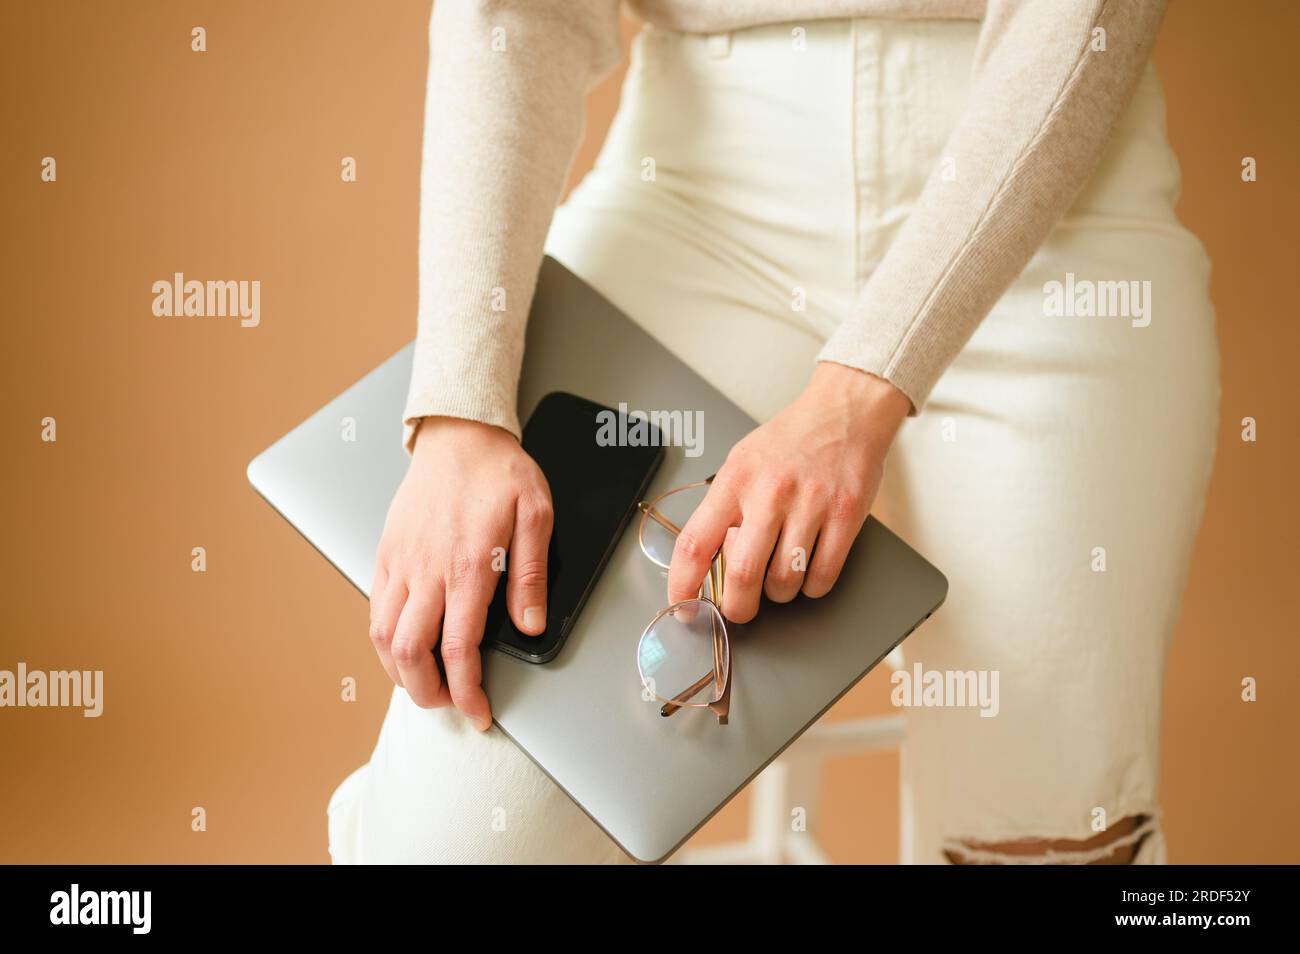 Close up of woman holding smart phone, laptop and glasses on leg Stock Photo